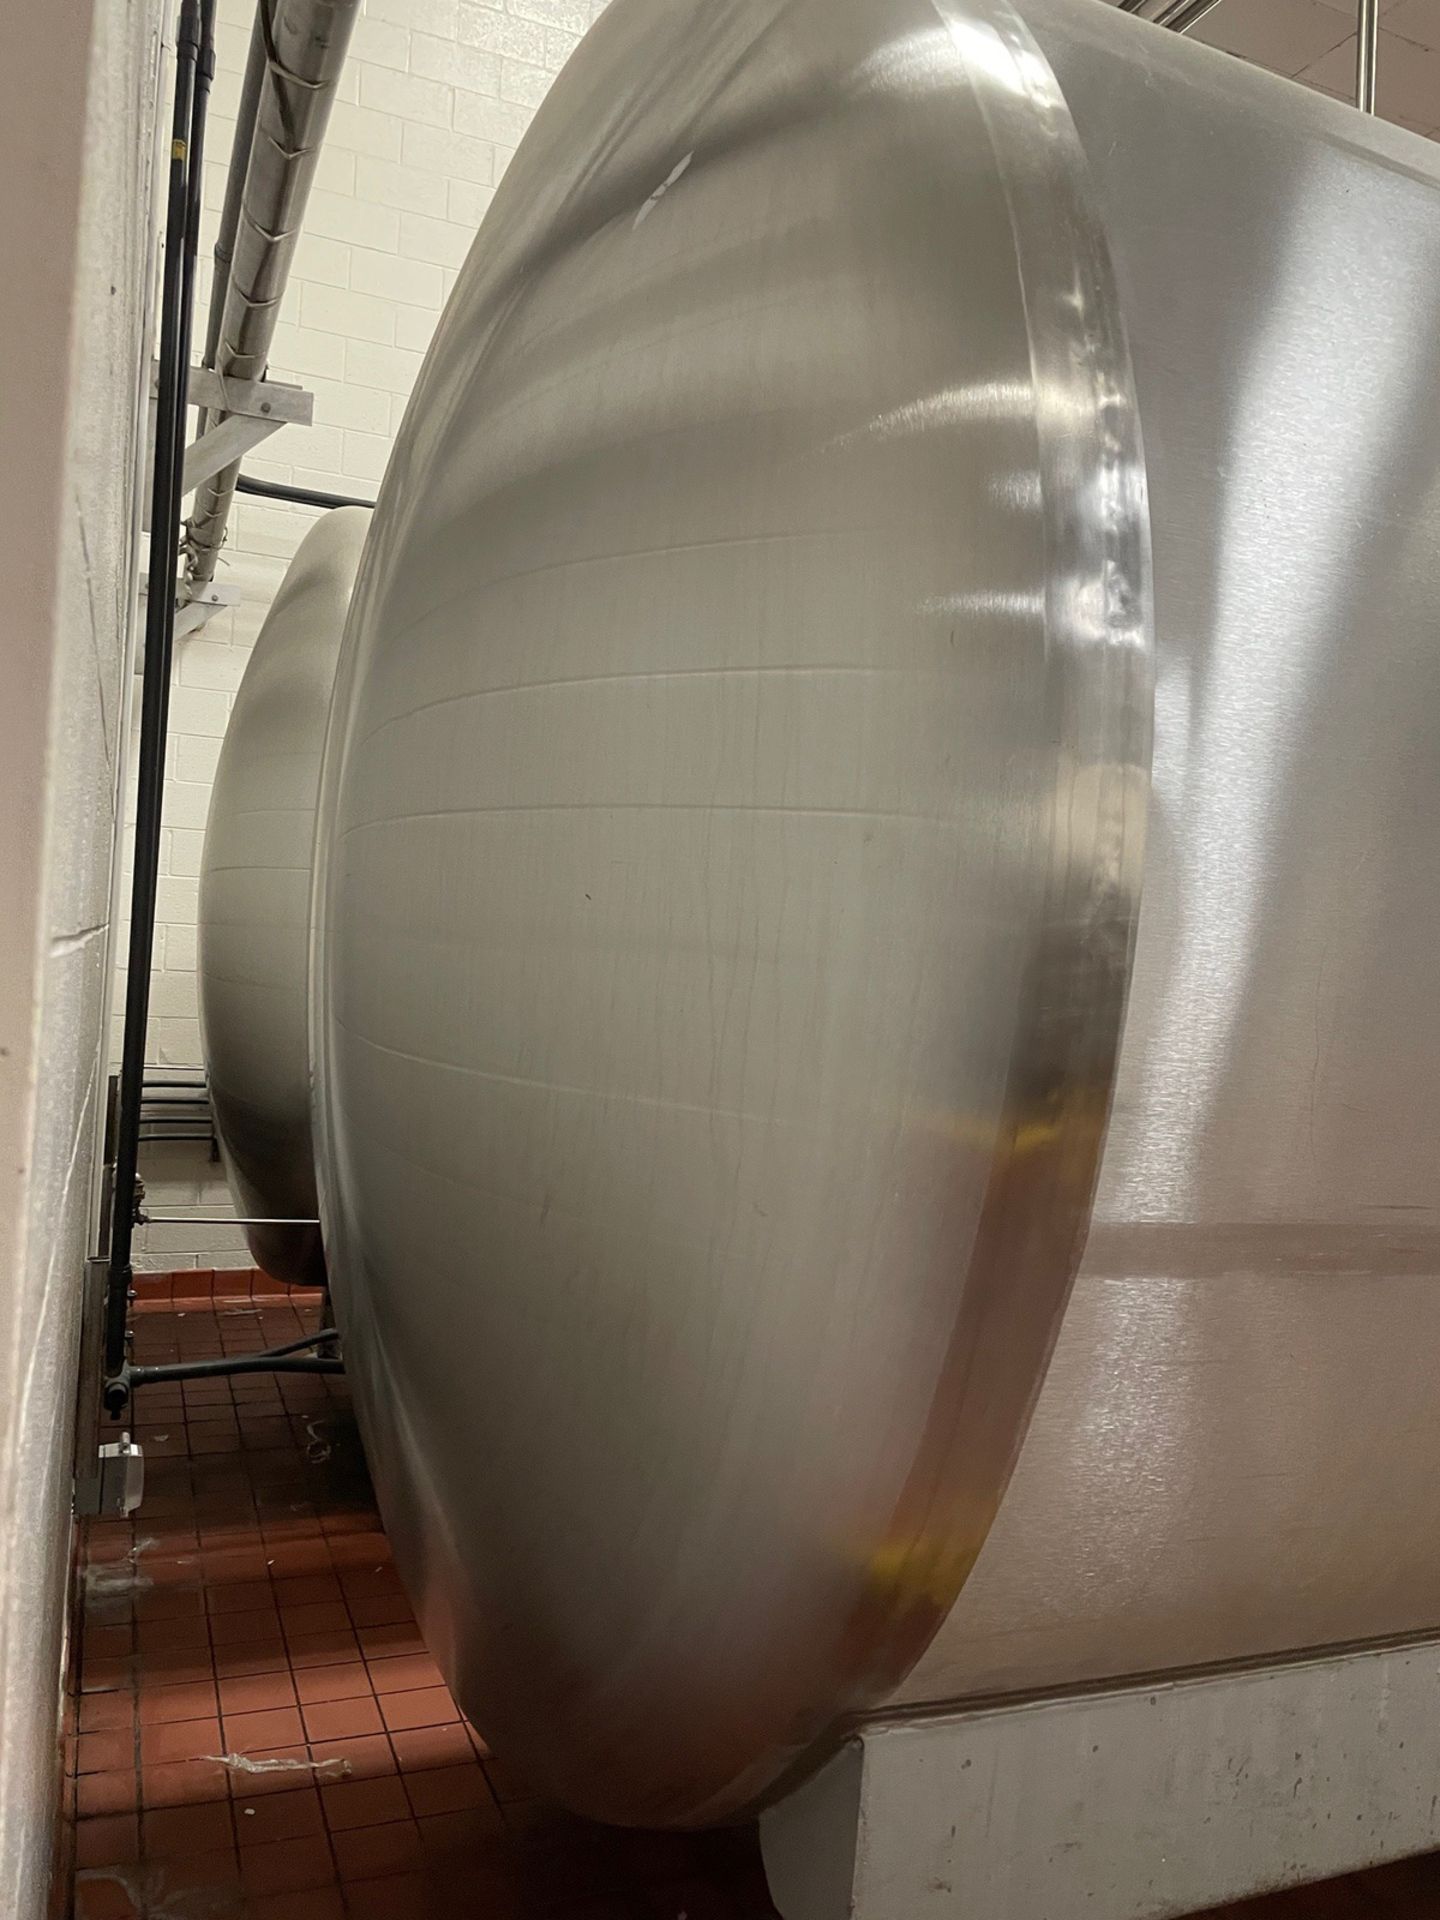 Creamery Package 5,300 Gallon Stainless Steel Horizontal Tank, Vertical Agitation, | Rig Fee: $2000 - Image 3 of 9